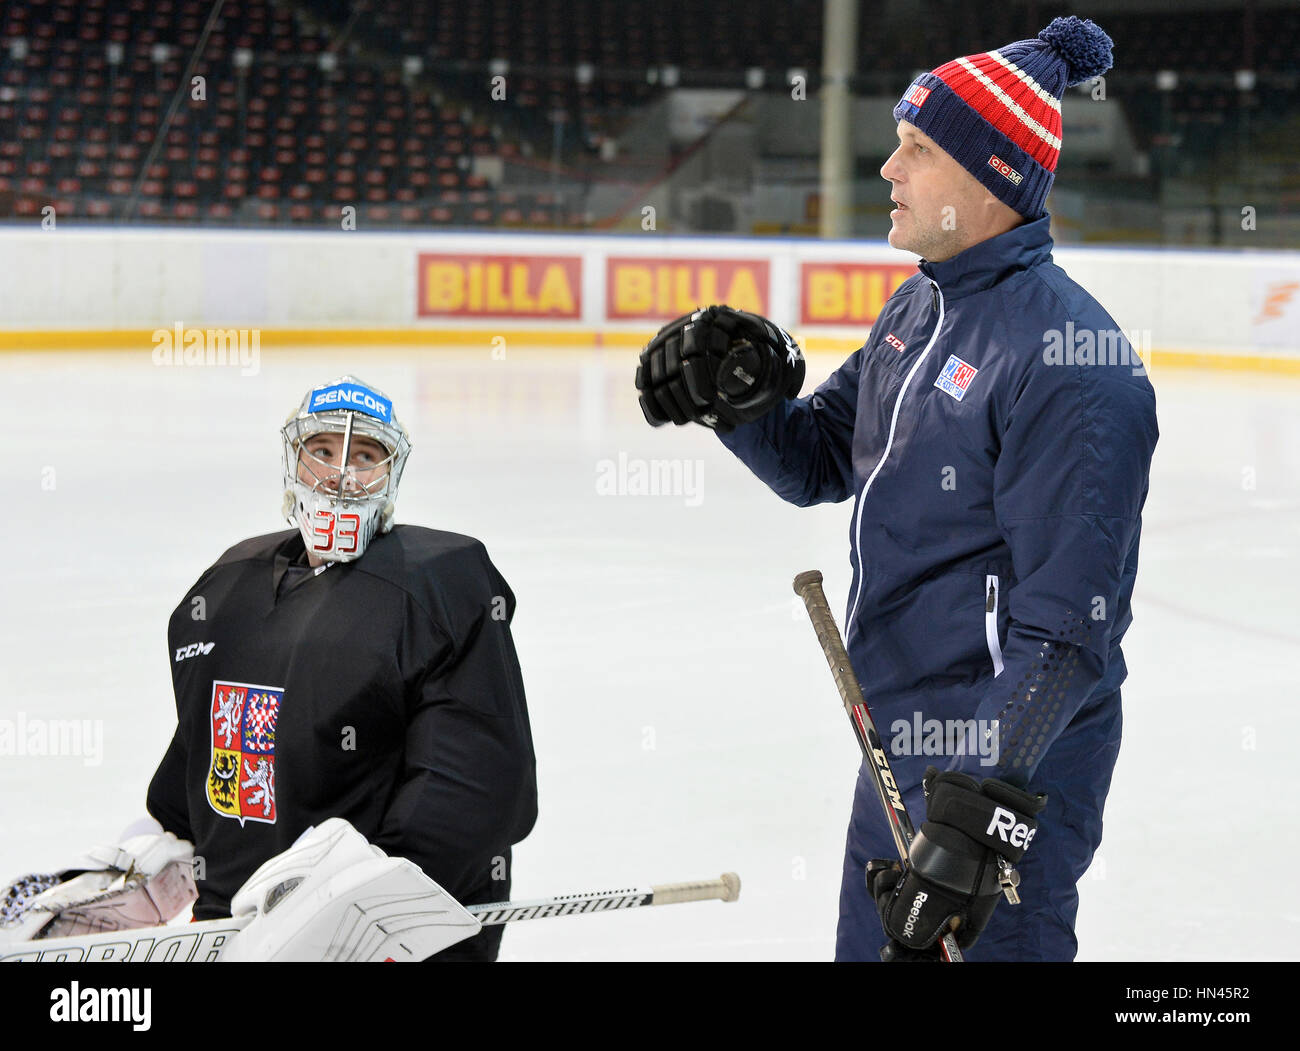 Prague, Czech Republic. 08th Feb, 2017. The Czech national ice-hockey team's player goalie Pavel Francouz and coach of goalies Zdenek Orct in action during the training session prior to the February Sweden Games in Gothenburg in Prague, Czech Republic, February 8, 2017. Sweden Games, the third part of the European Hockey Tour (EHT) series, will take place on February 9-12. Credit: Katerina Sulova/CTK Photo/Alamy Live News Stock Photo